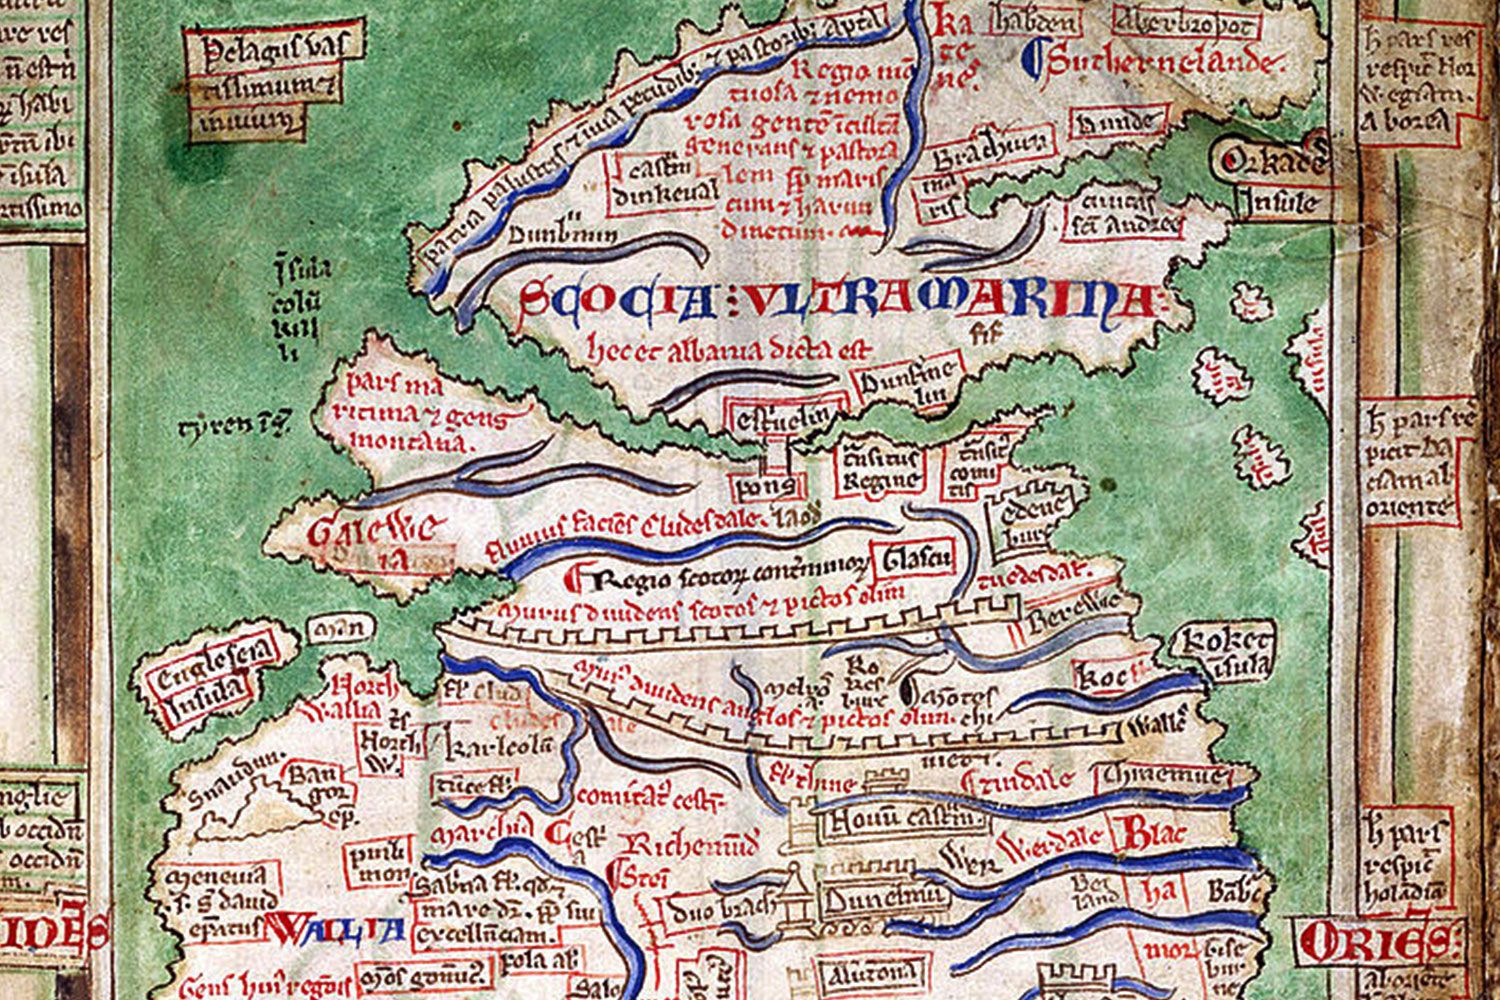 A medieval map by Matthew Paris circa 1250 AD shows both Hadrian's Wall and the Antonine Wall.